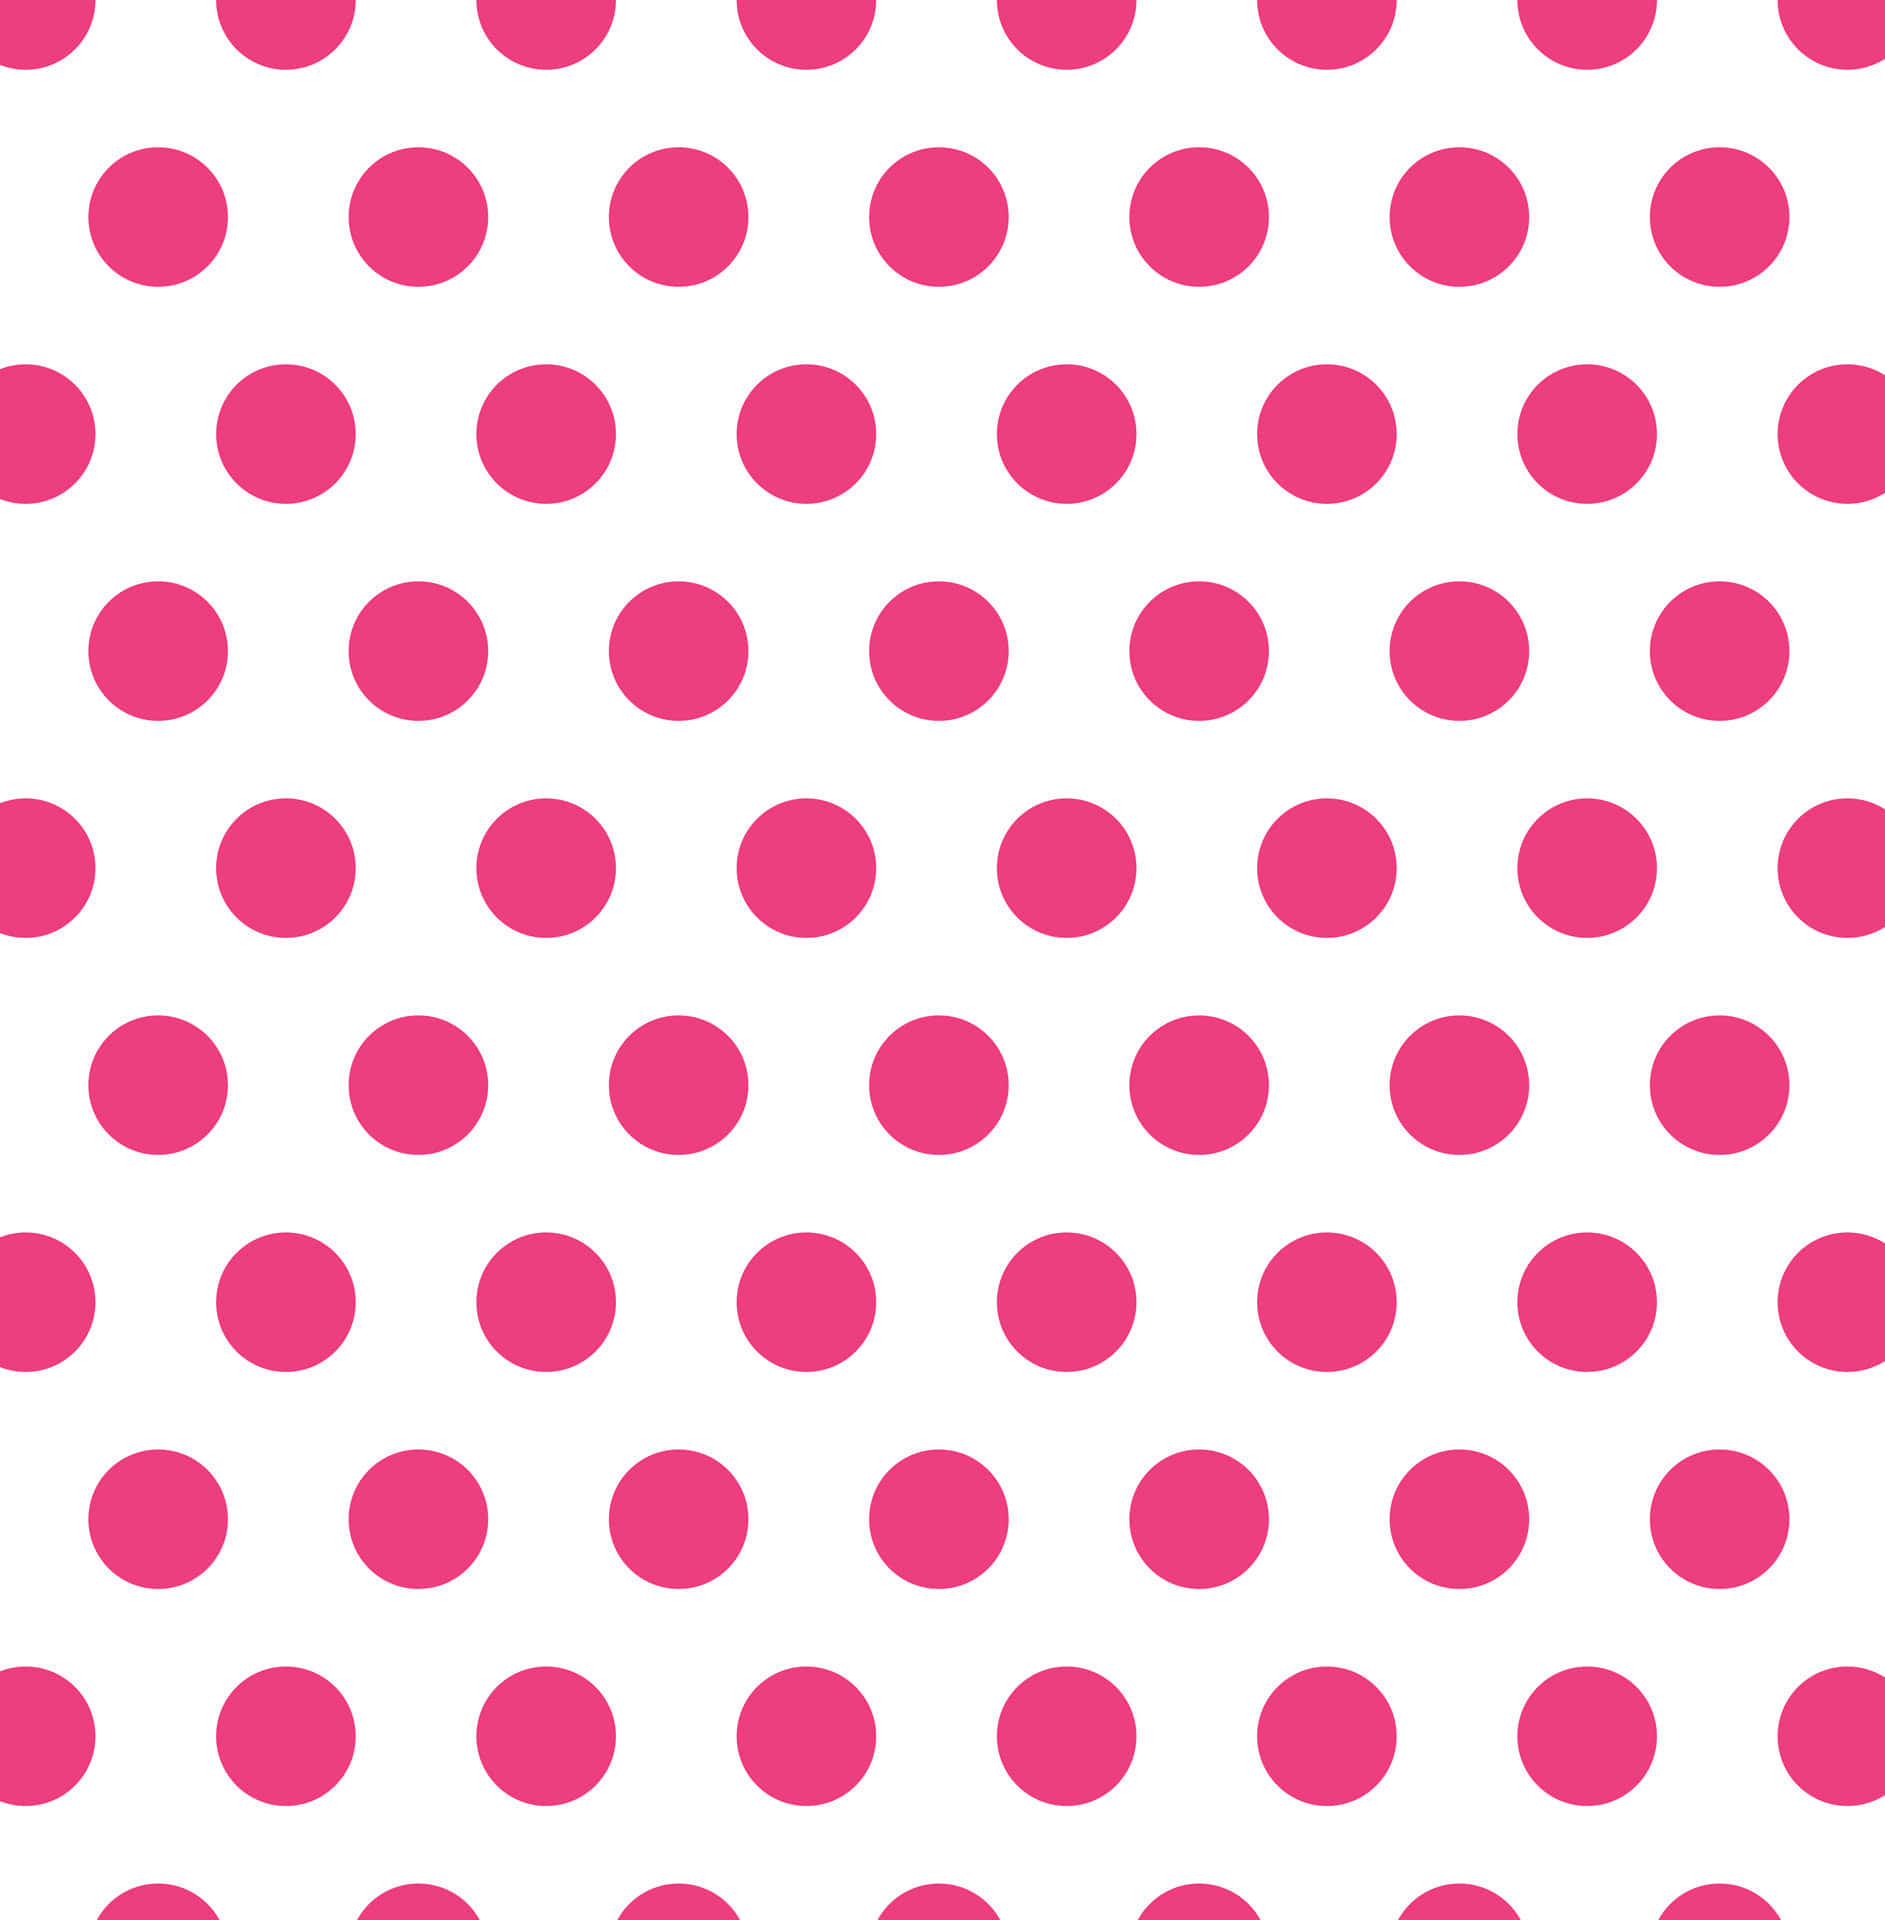 Cute Aesthetic Pink And White Polka Dot Wallpaper